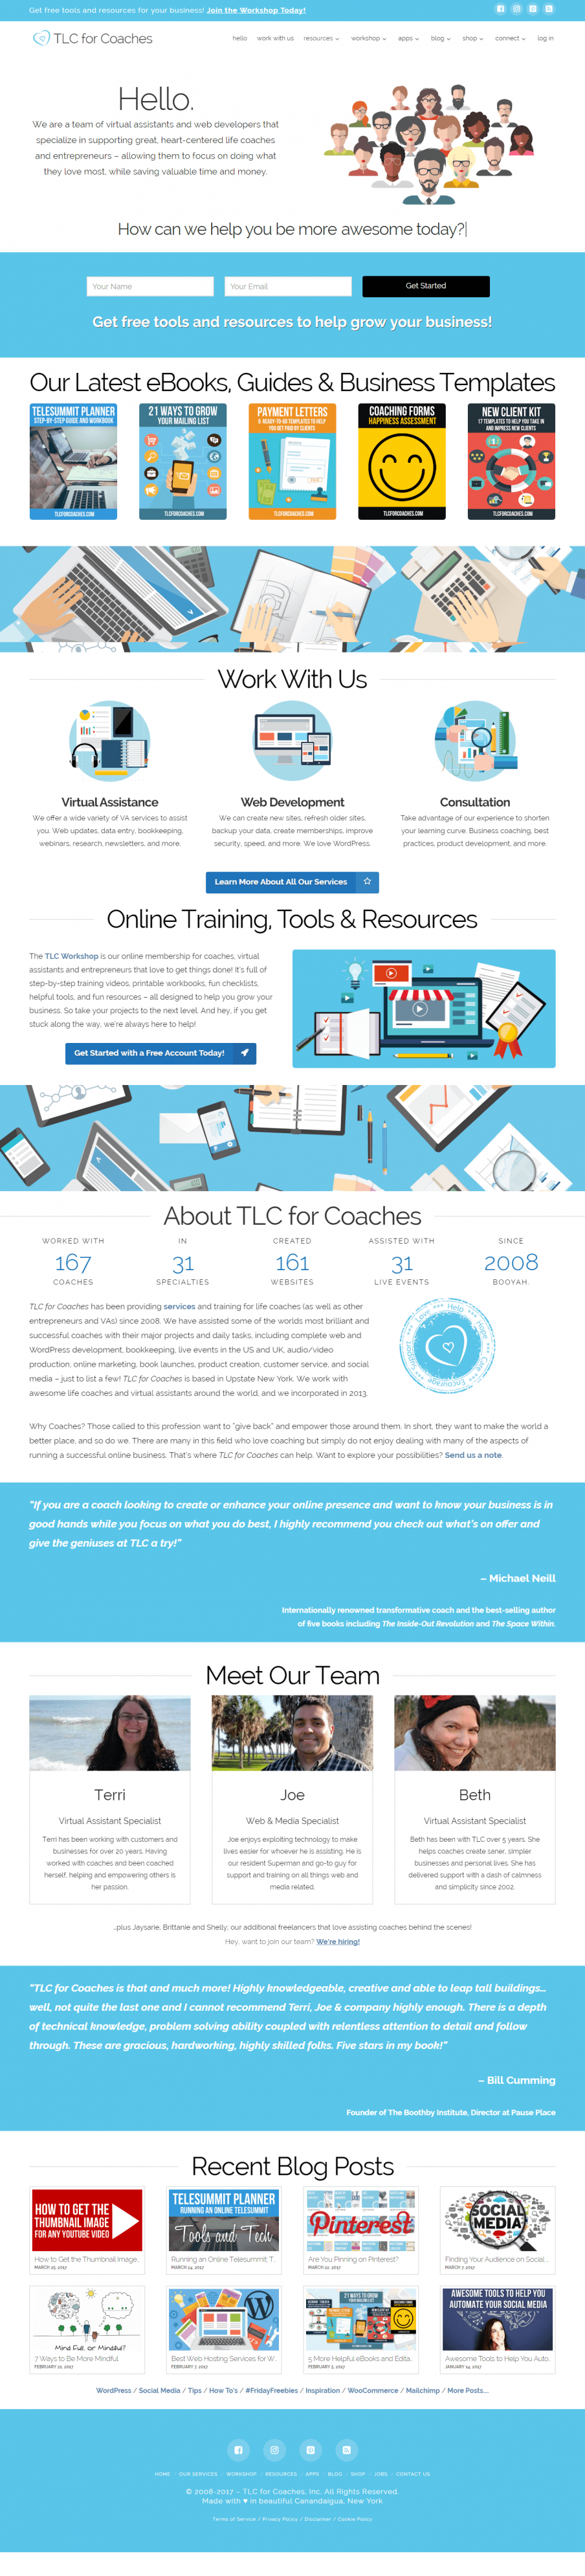 TLC for Coaches